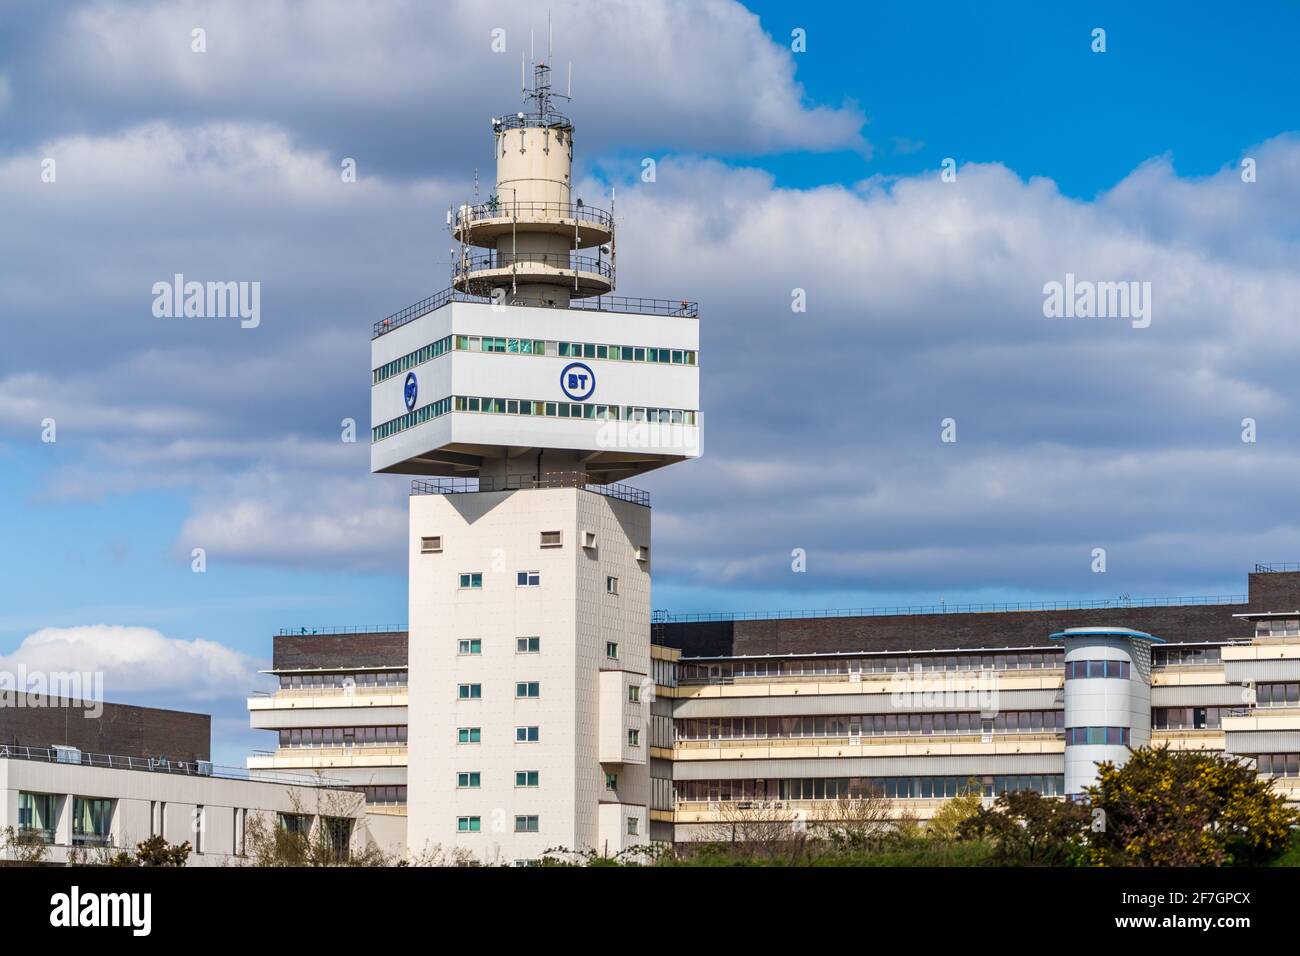 BT Labs at Adastral Park Martlesham. BT Martlesham Innovation and Research Labs. BT Research Labs. Stock Photo